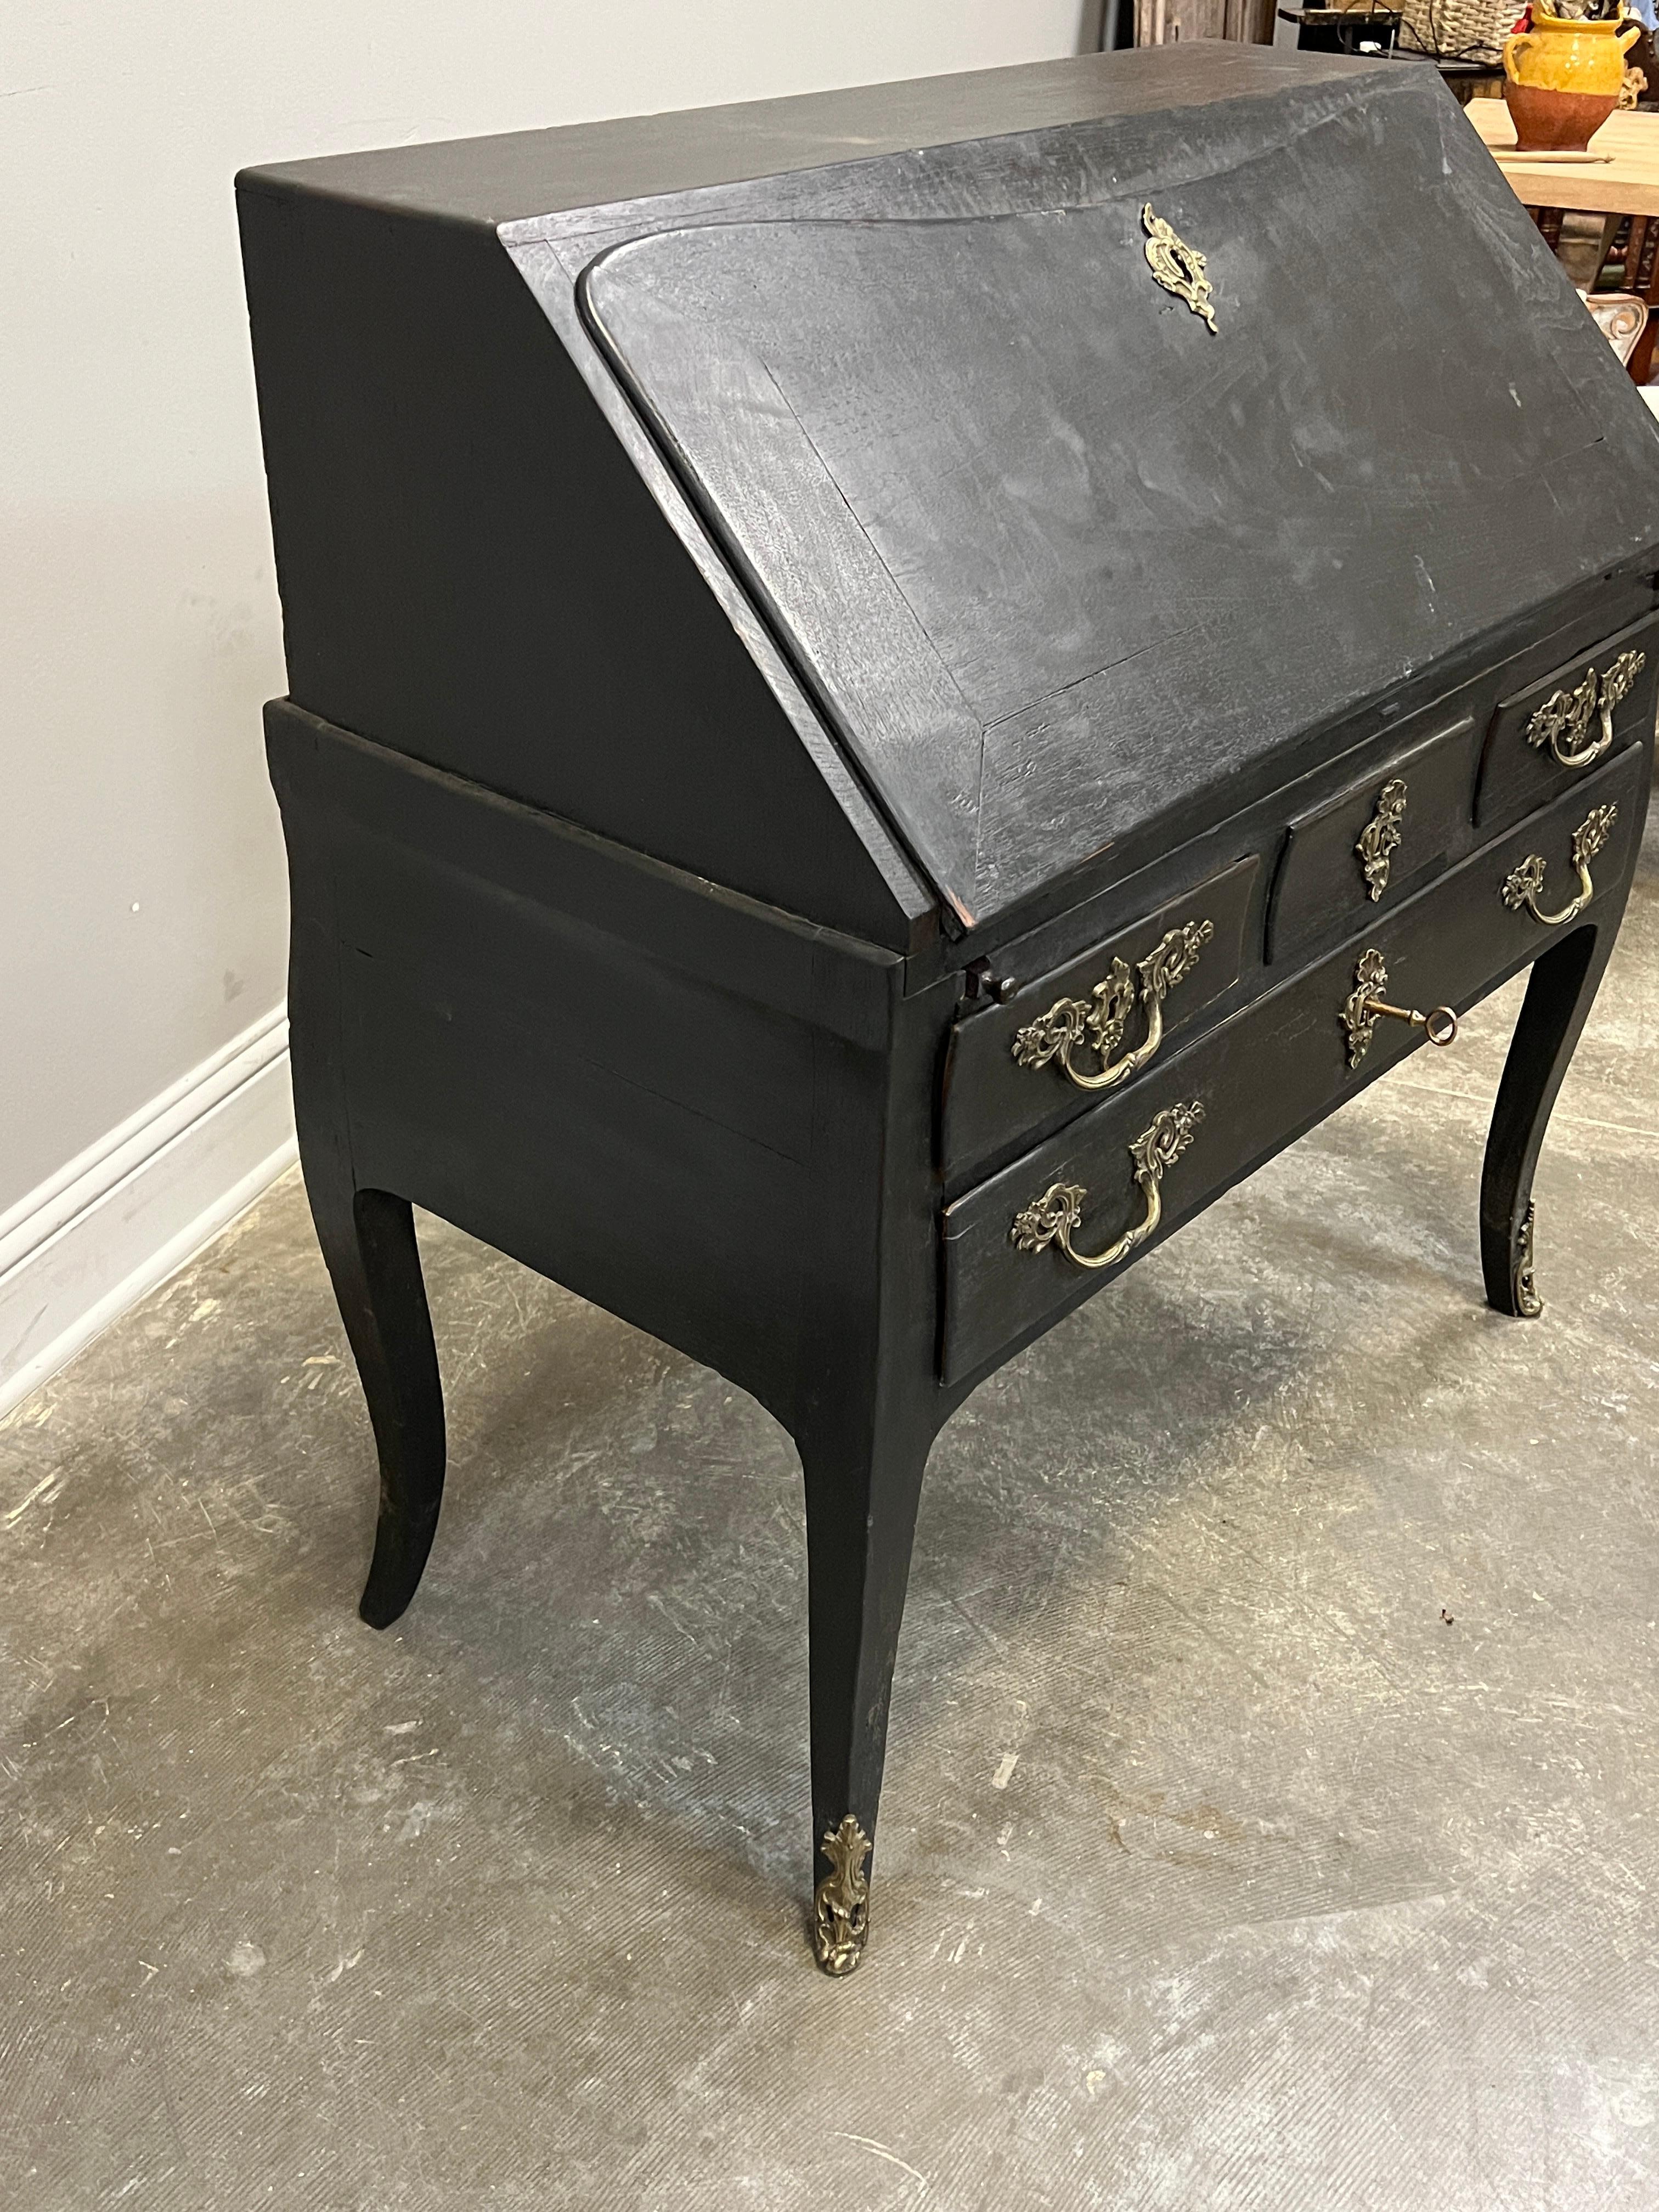 19th Century French Slant Front Painted Desk with Drop Front In Good Condition For Sale In Houston, US